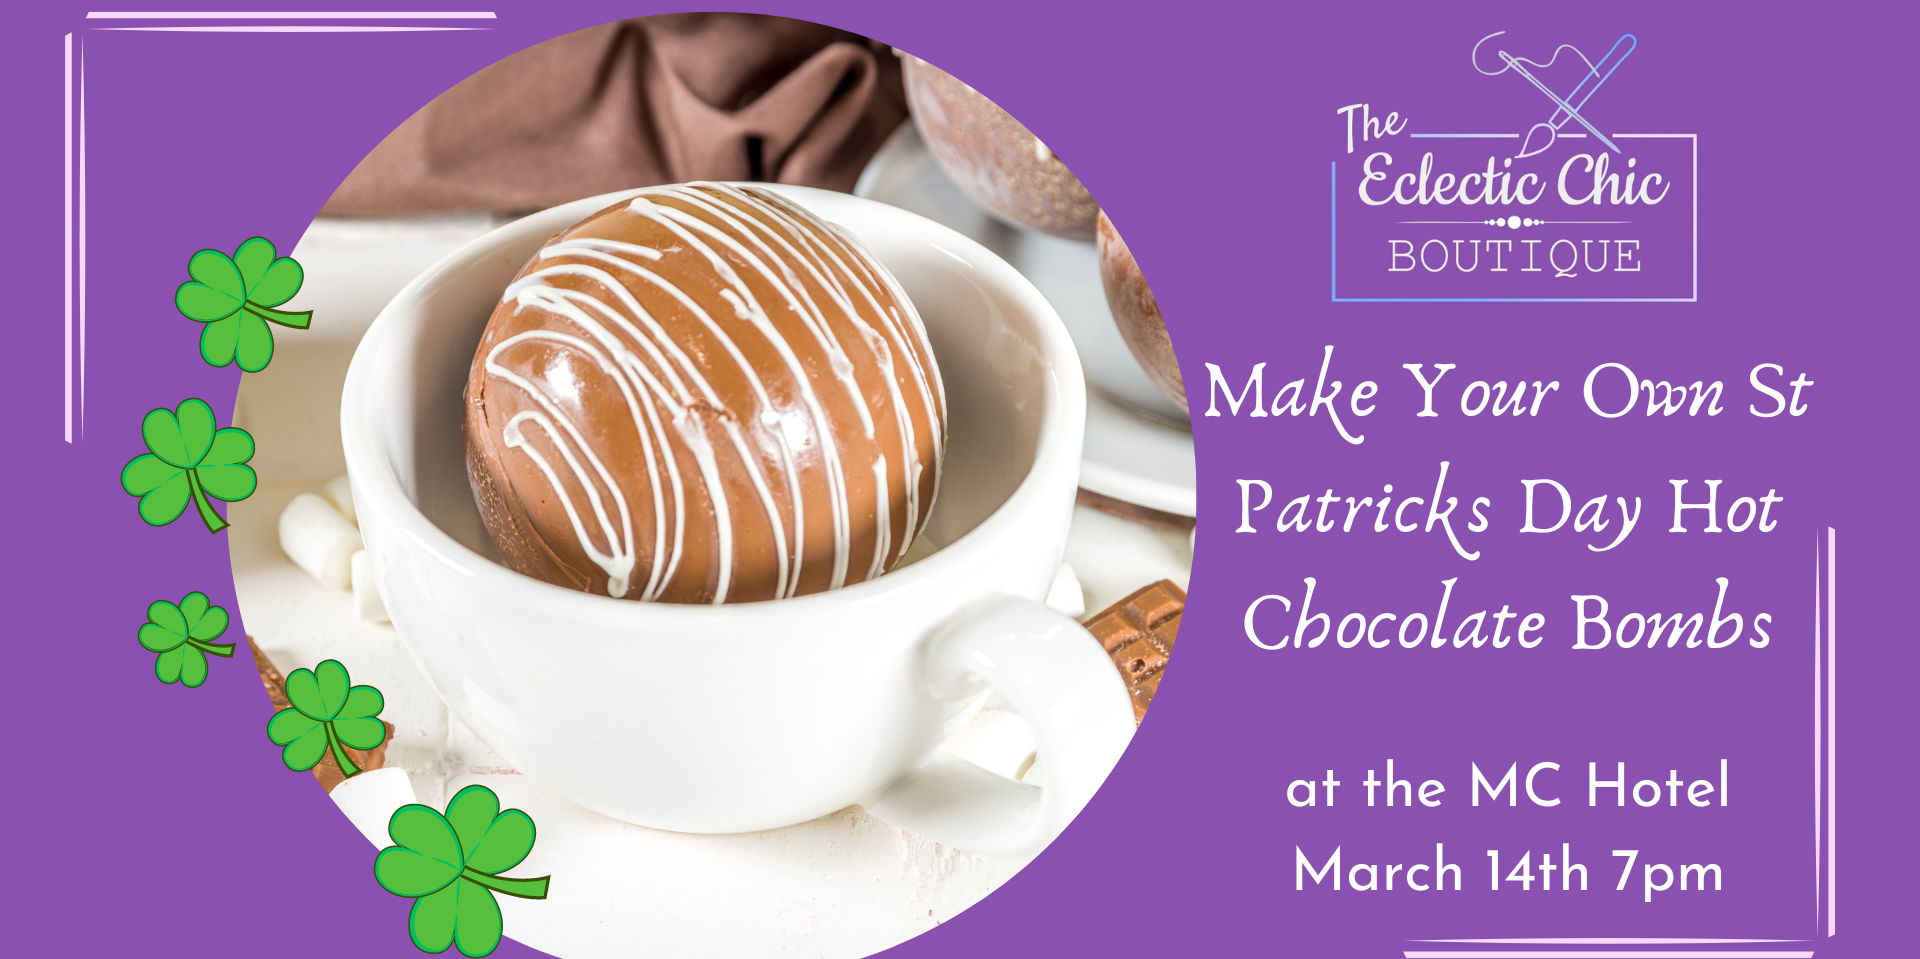 Make Your Own St Patricks Day Hot Chocolate Bombs promotional image